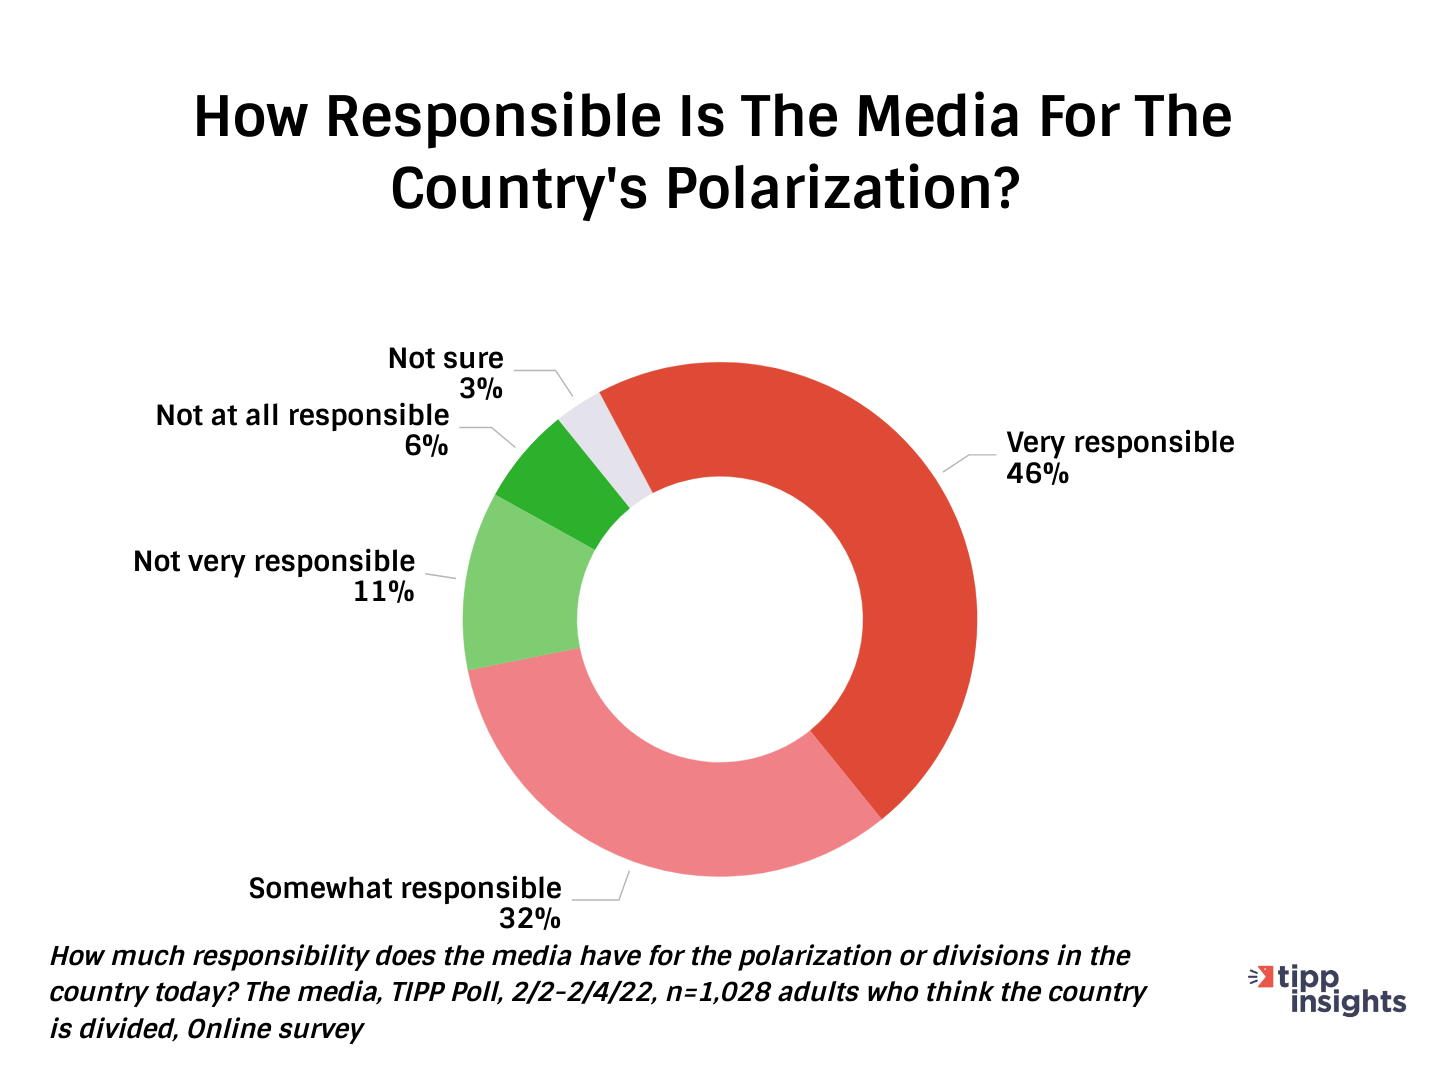 TIPP Poll Results: How responsible is the media for the country's polarization?